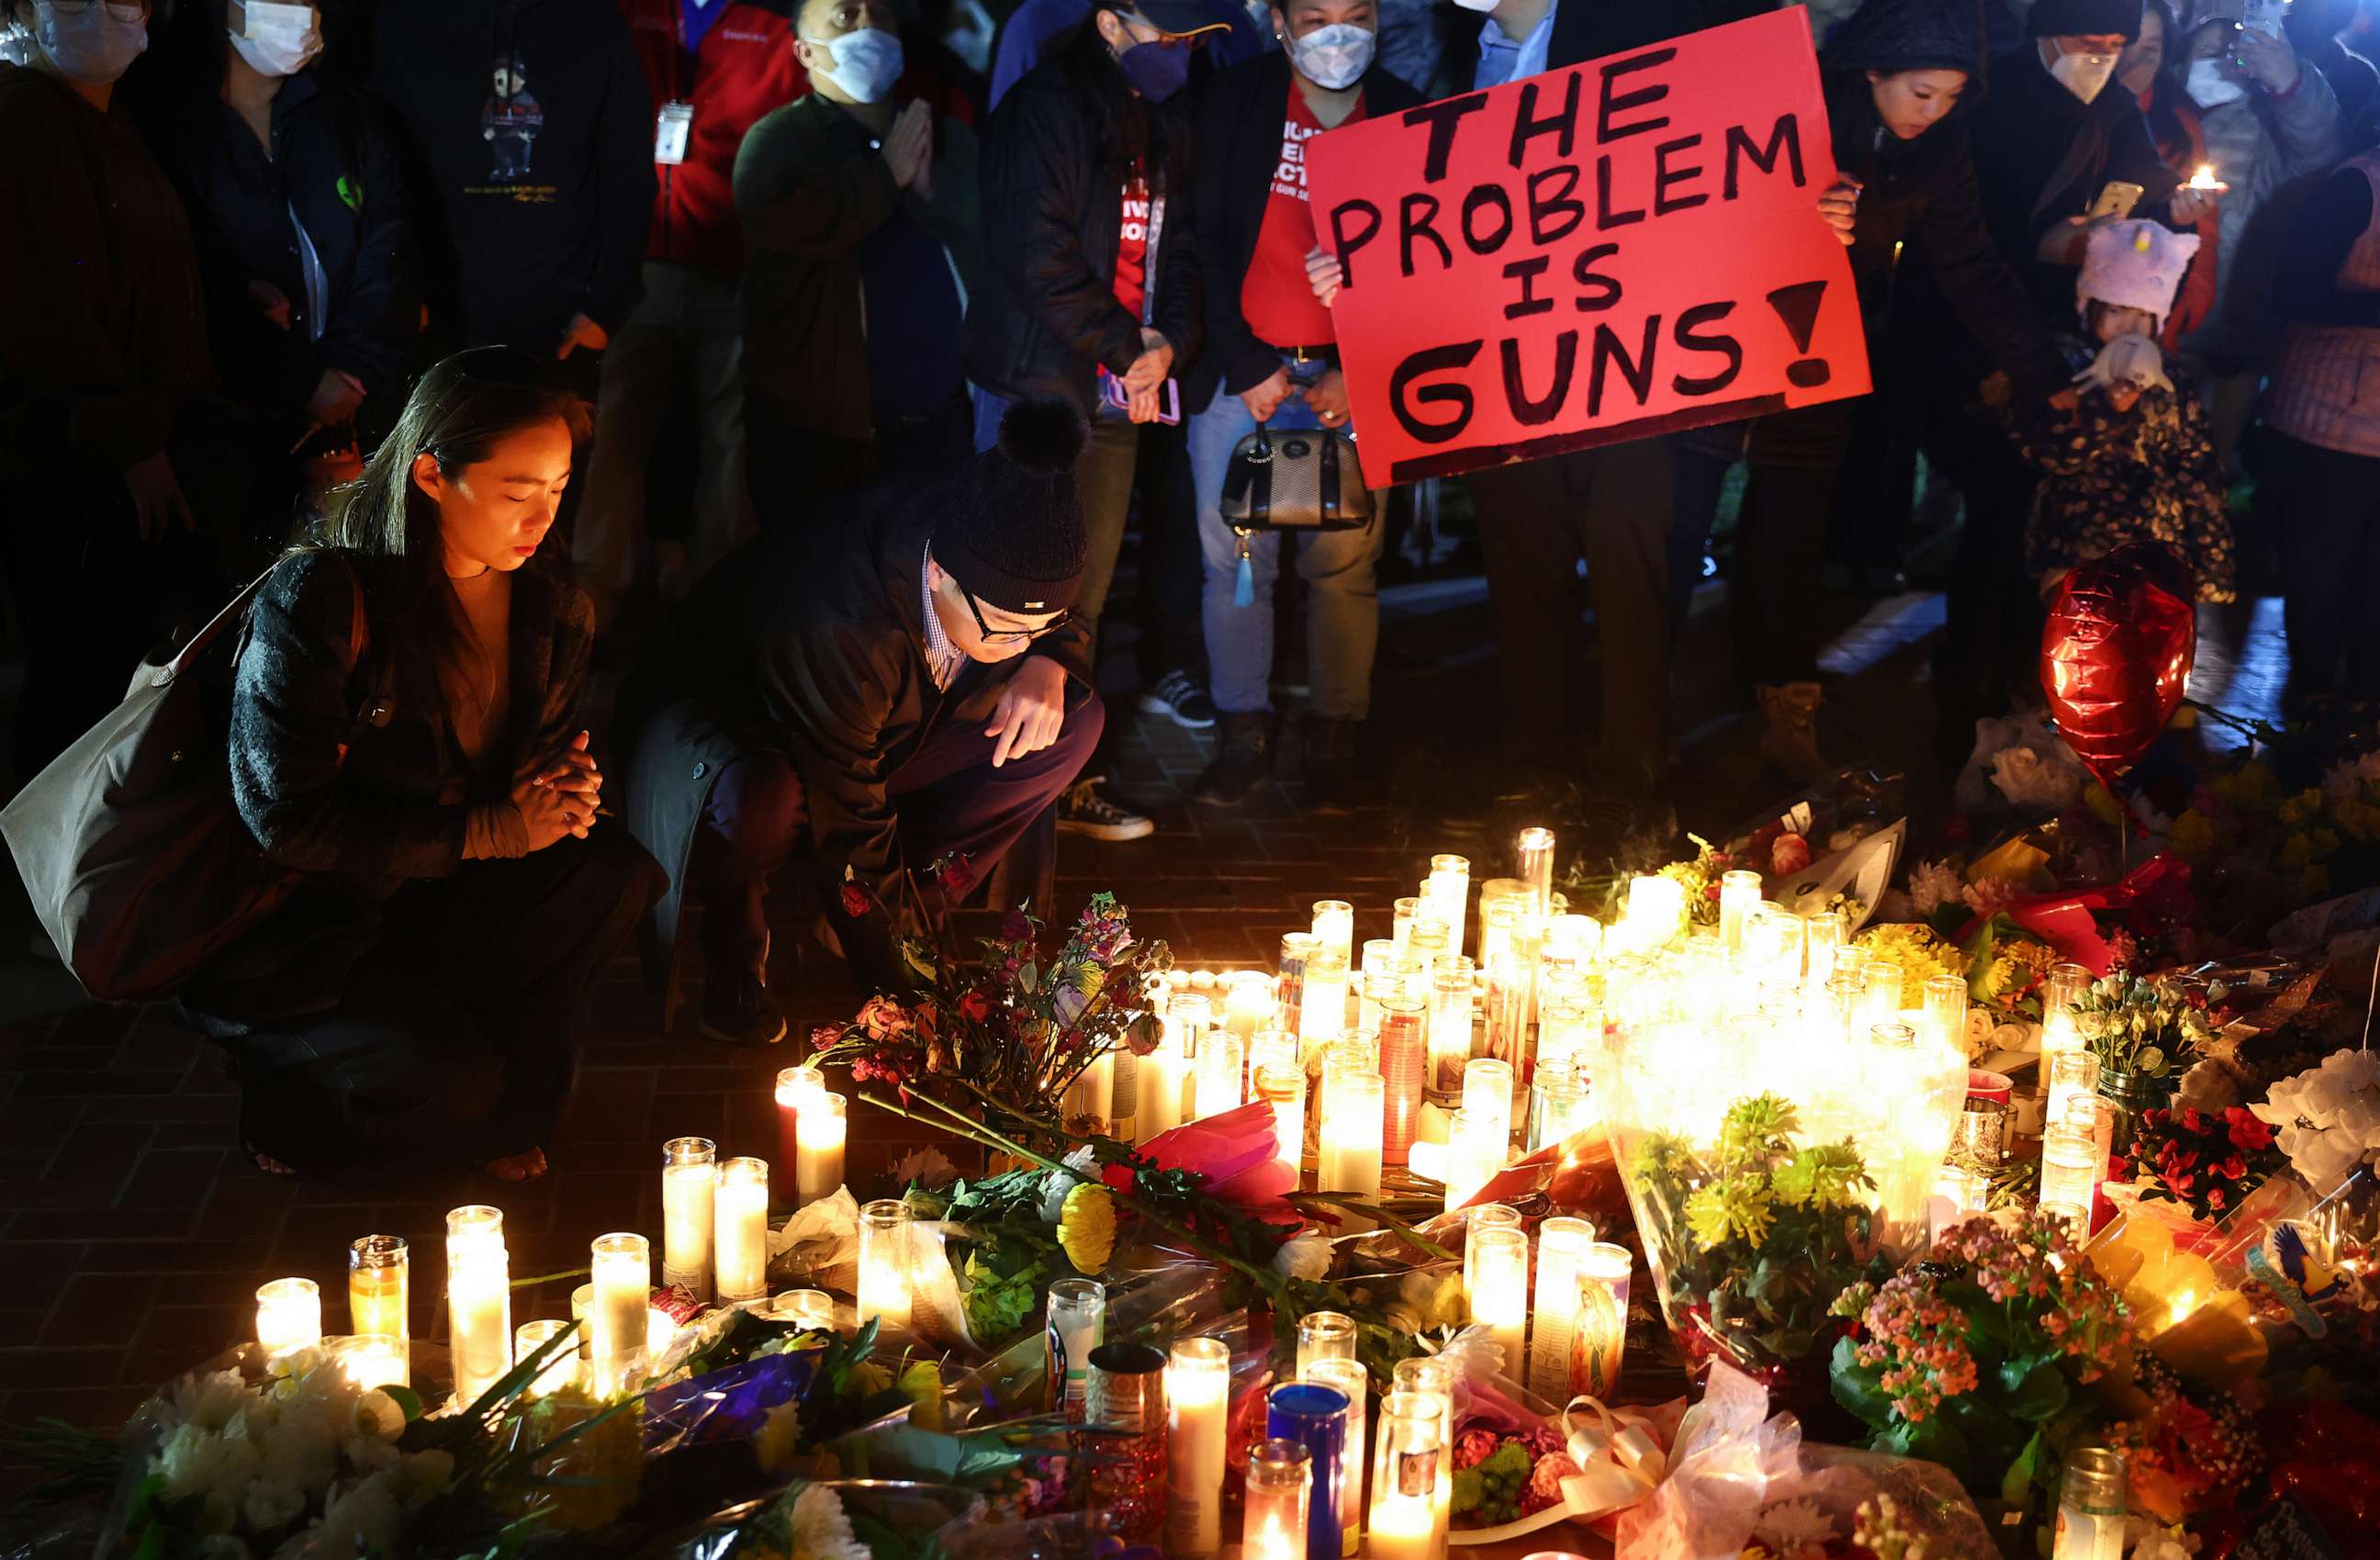 PHOTO: People attend a candlelight vigil for victims of a deadly mass shooting at a ballroom dance studio, as a person holds a sign reading "The Problem Is Guns!", on Jan. 24, 2023 in Monterey Park, Calif.